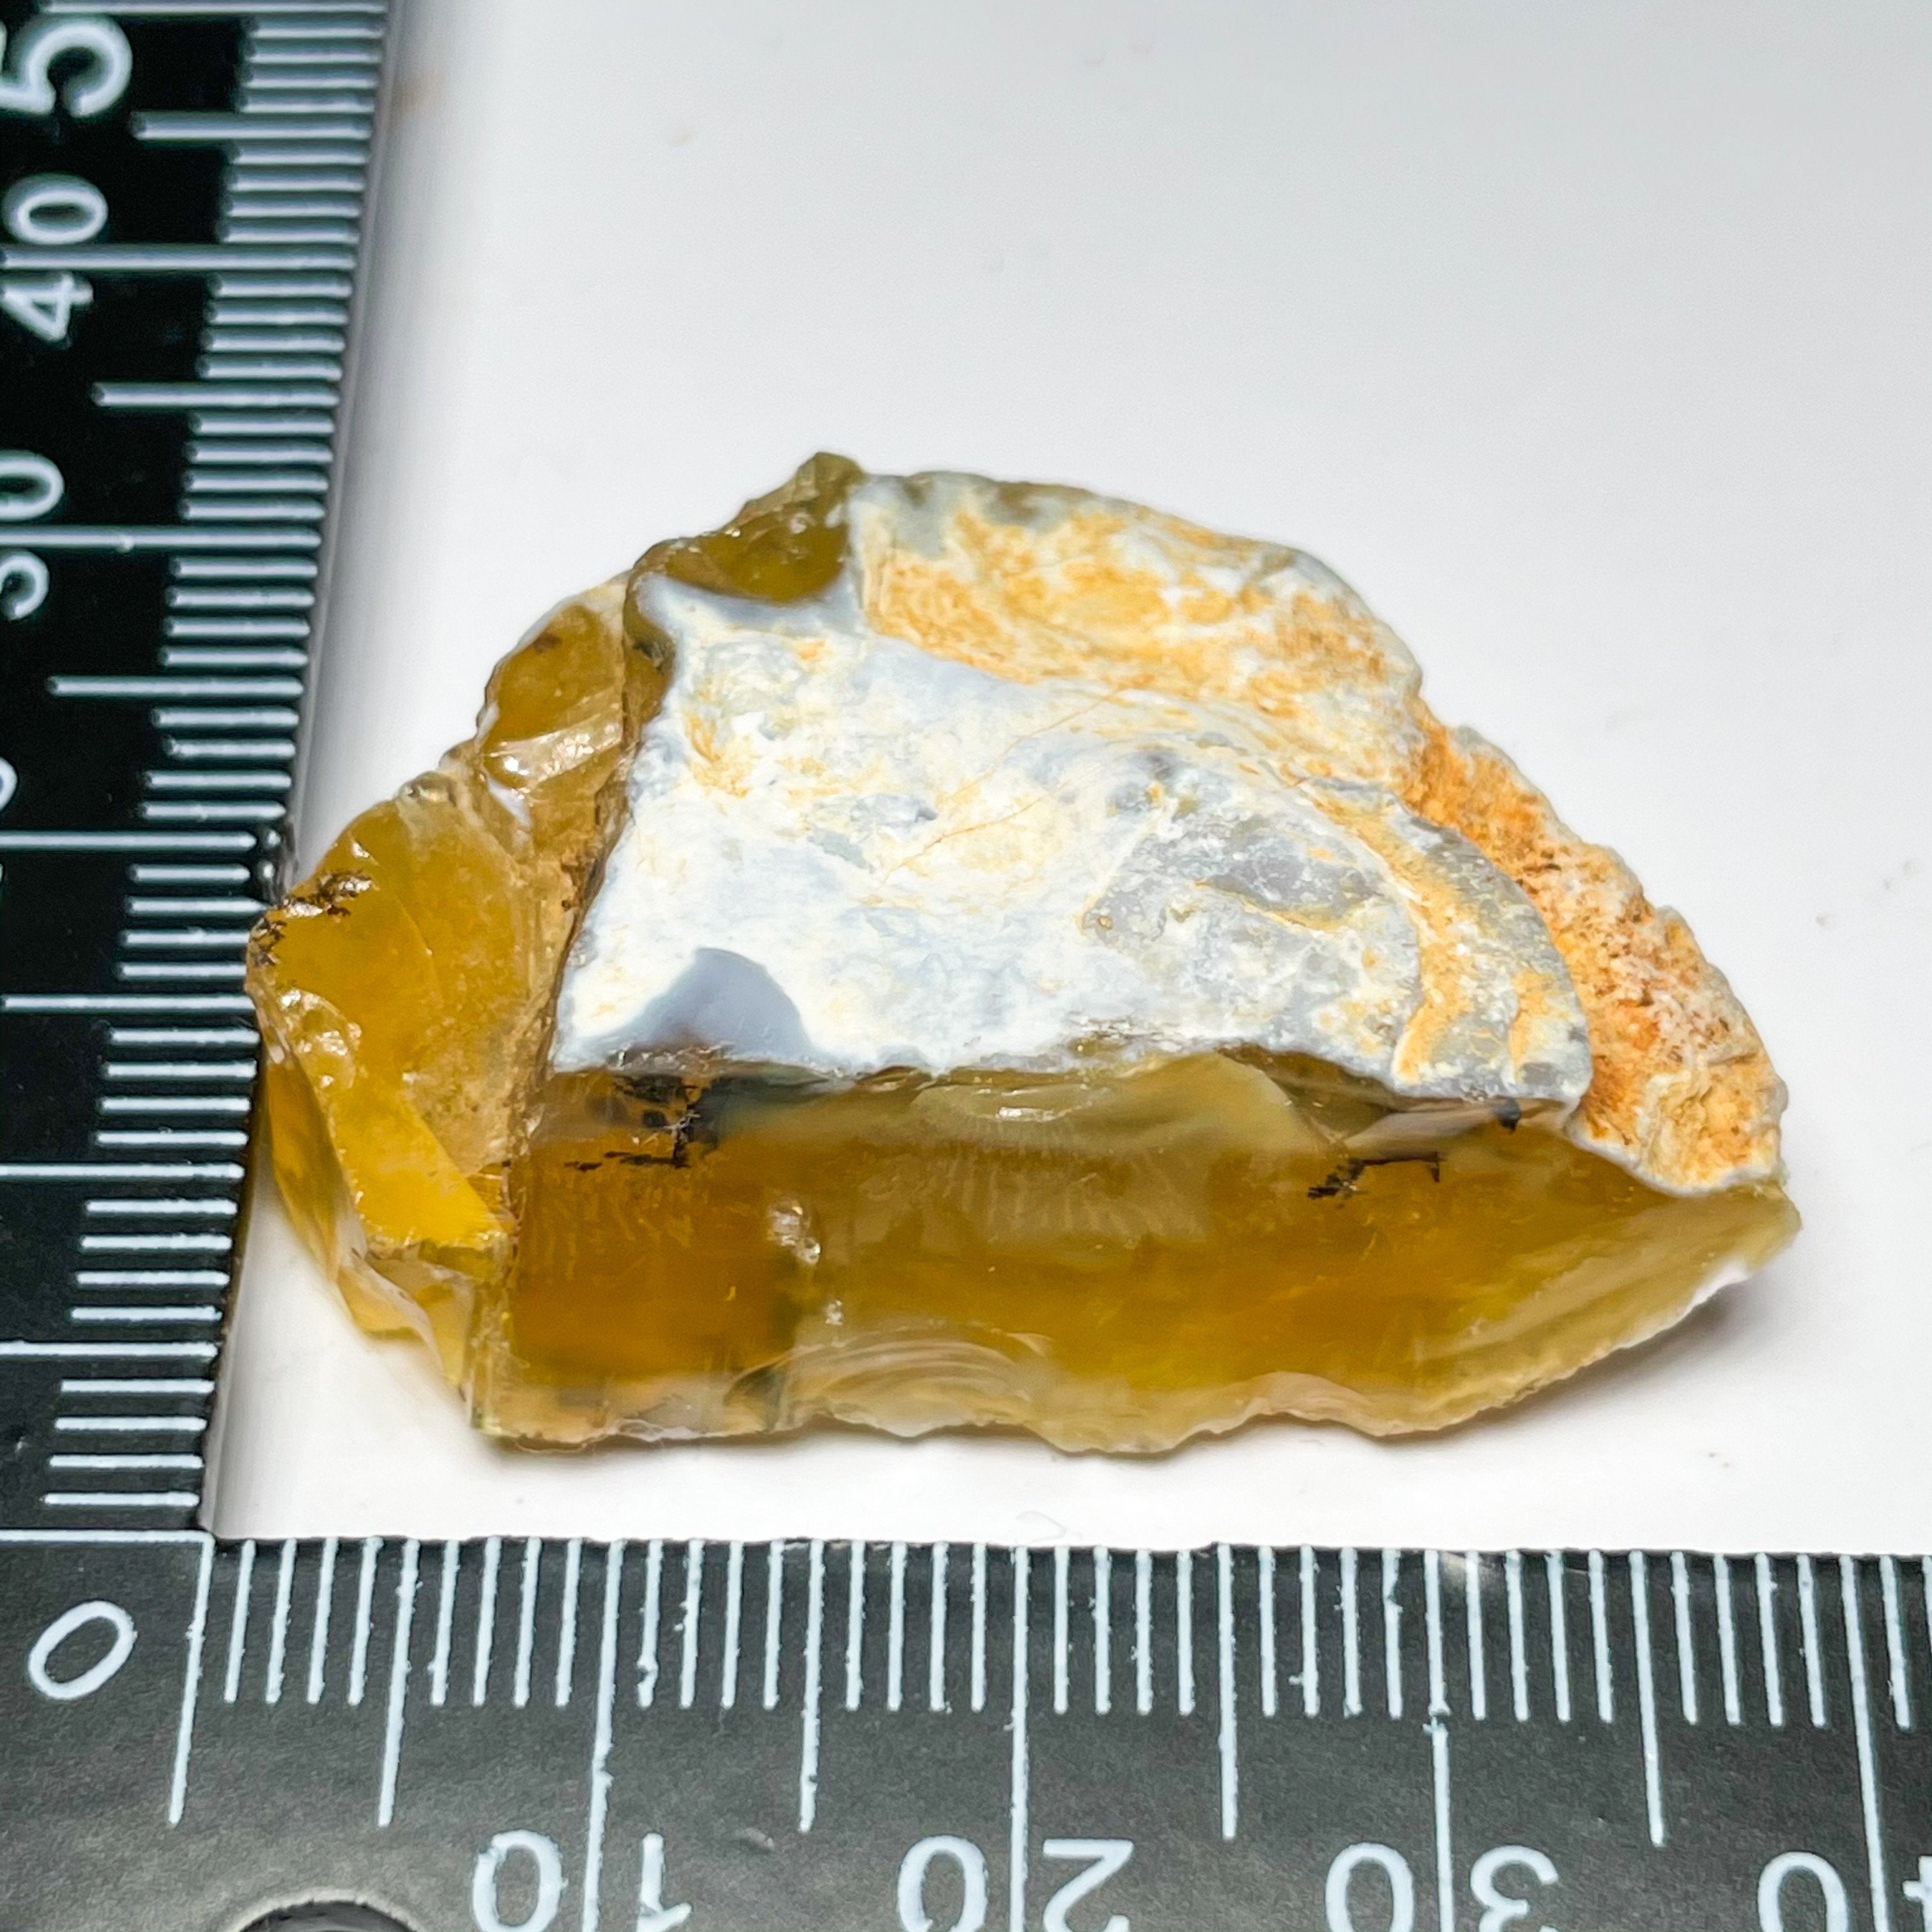 78.02Ct Opal Tanzania Untreated Unheated From A 1999 Deposit Chatoyant (Cats-Eye Effect)